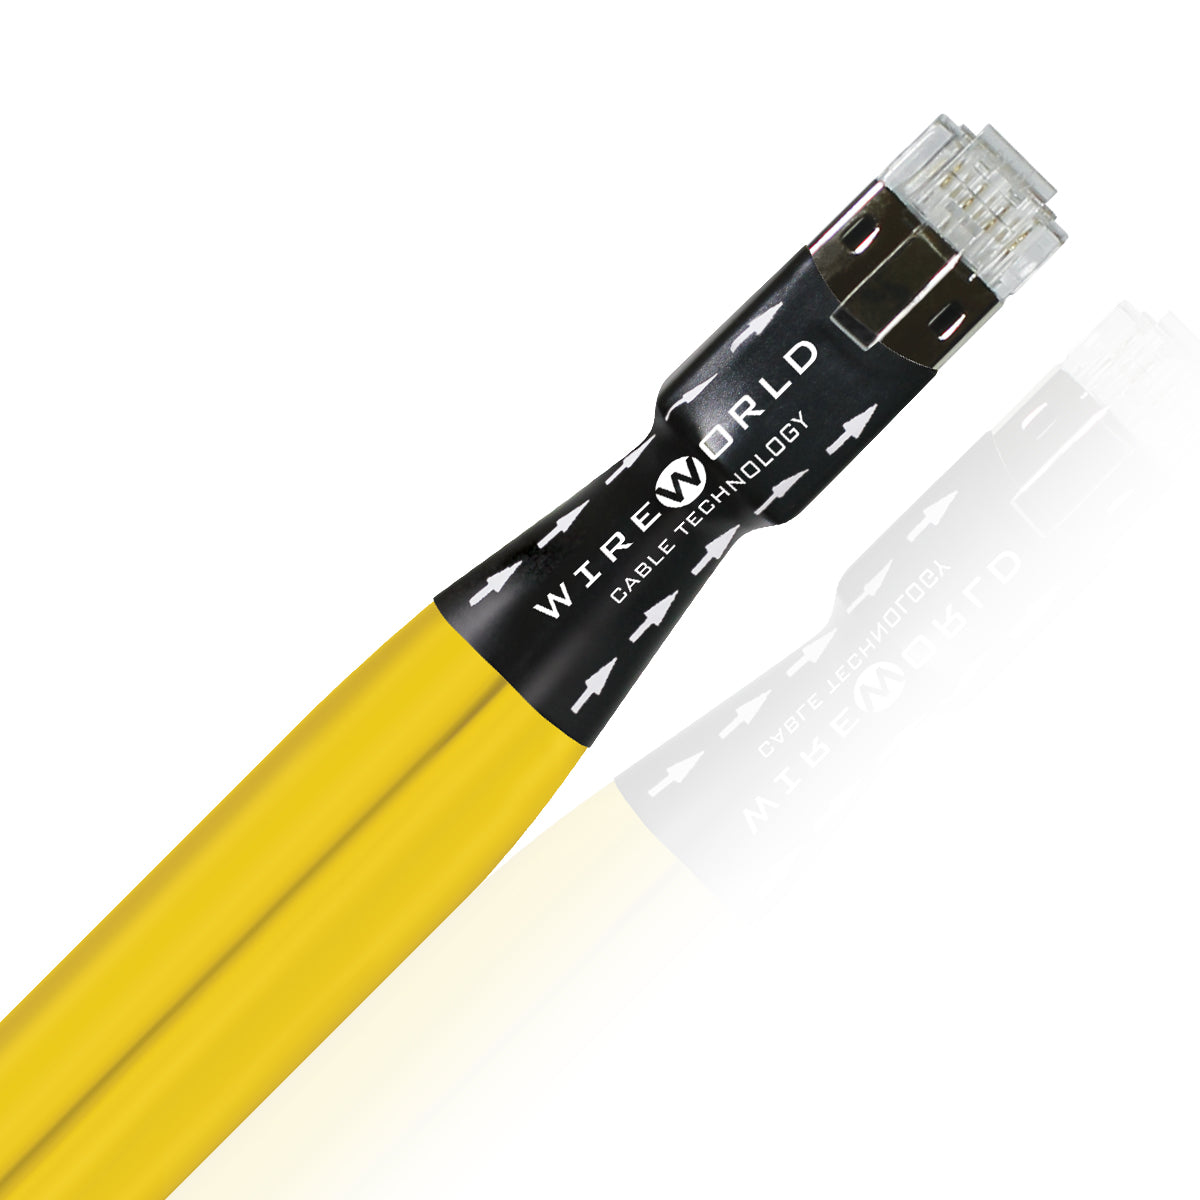 Cat 8 Ethernet Cable for Rj45 Connectors, Ethernet India